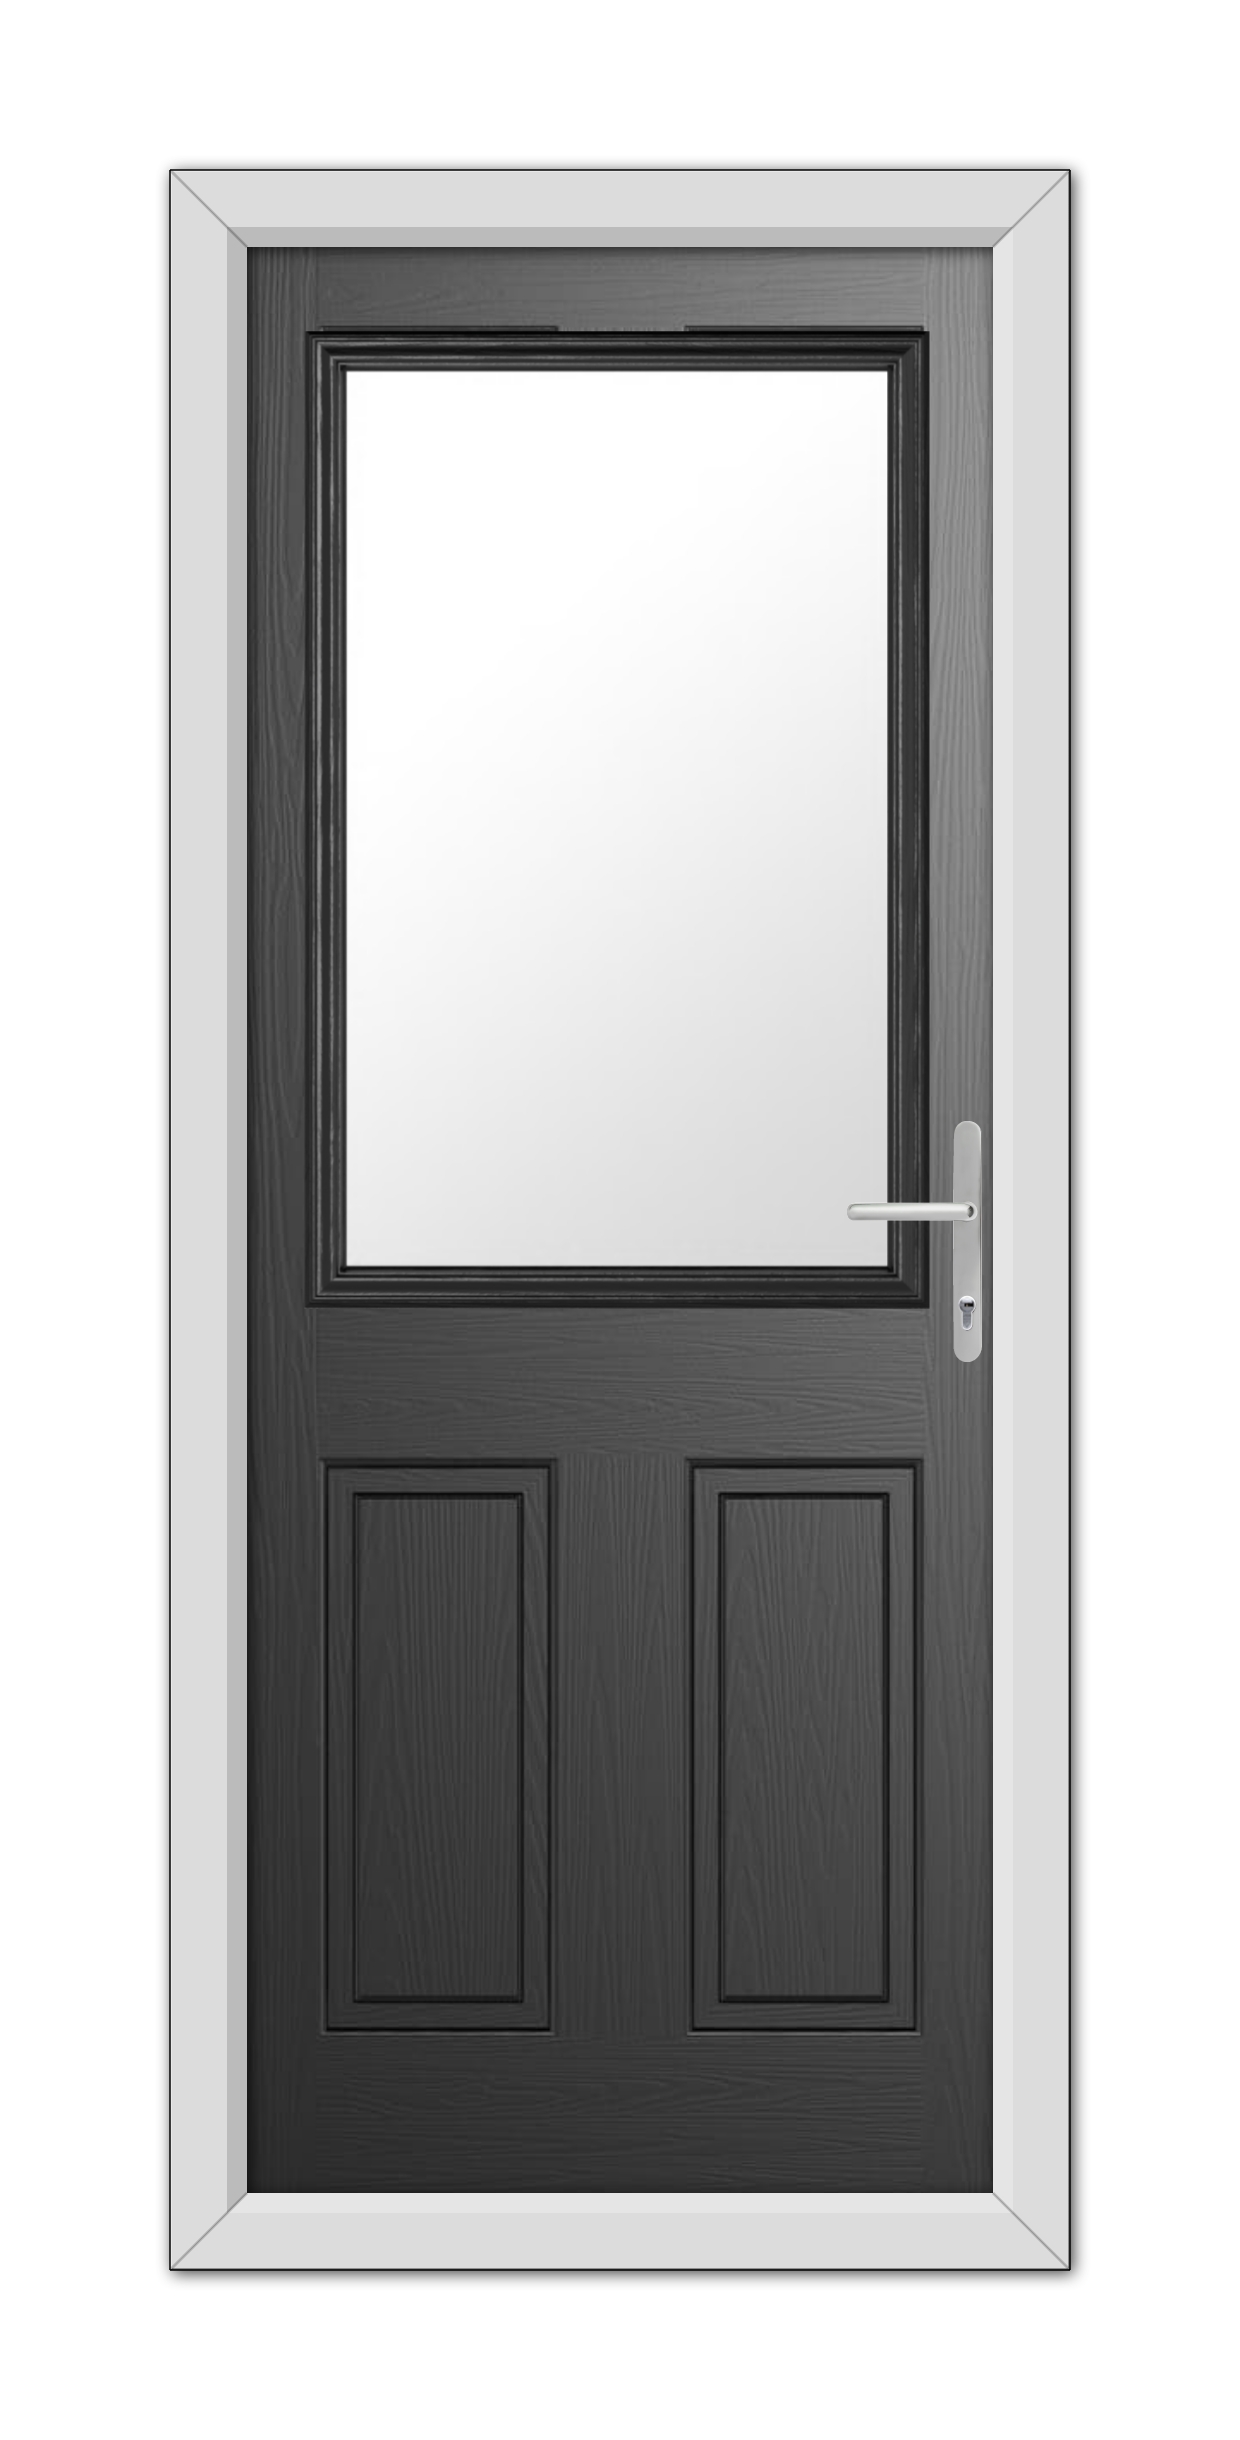 Front view of a closed Black Buxton Composite Door 48mm Timber Core with a large rectangular glass panel at the top, set in a white frame.